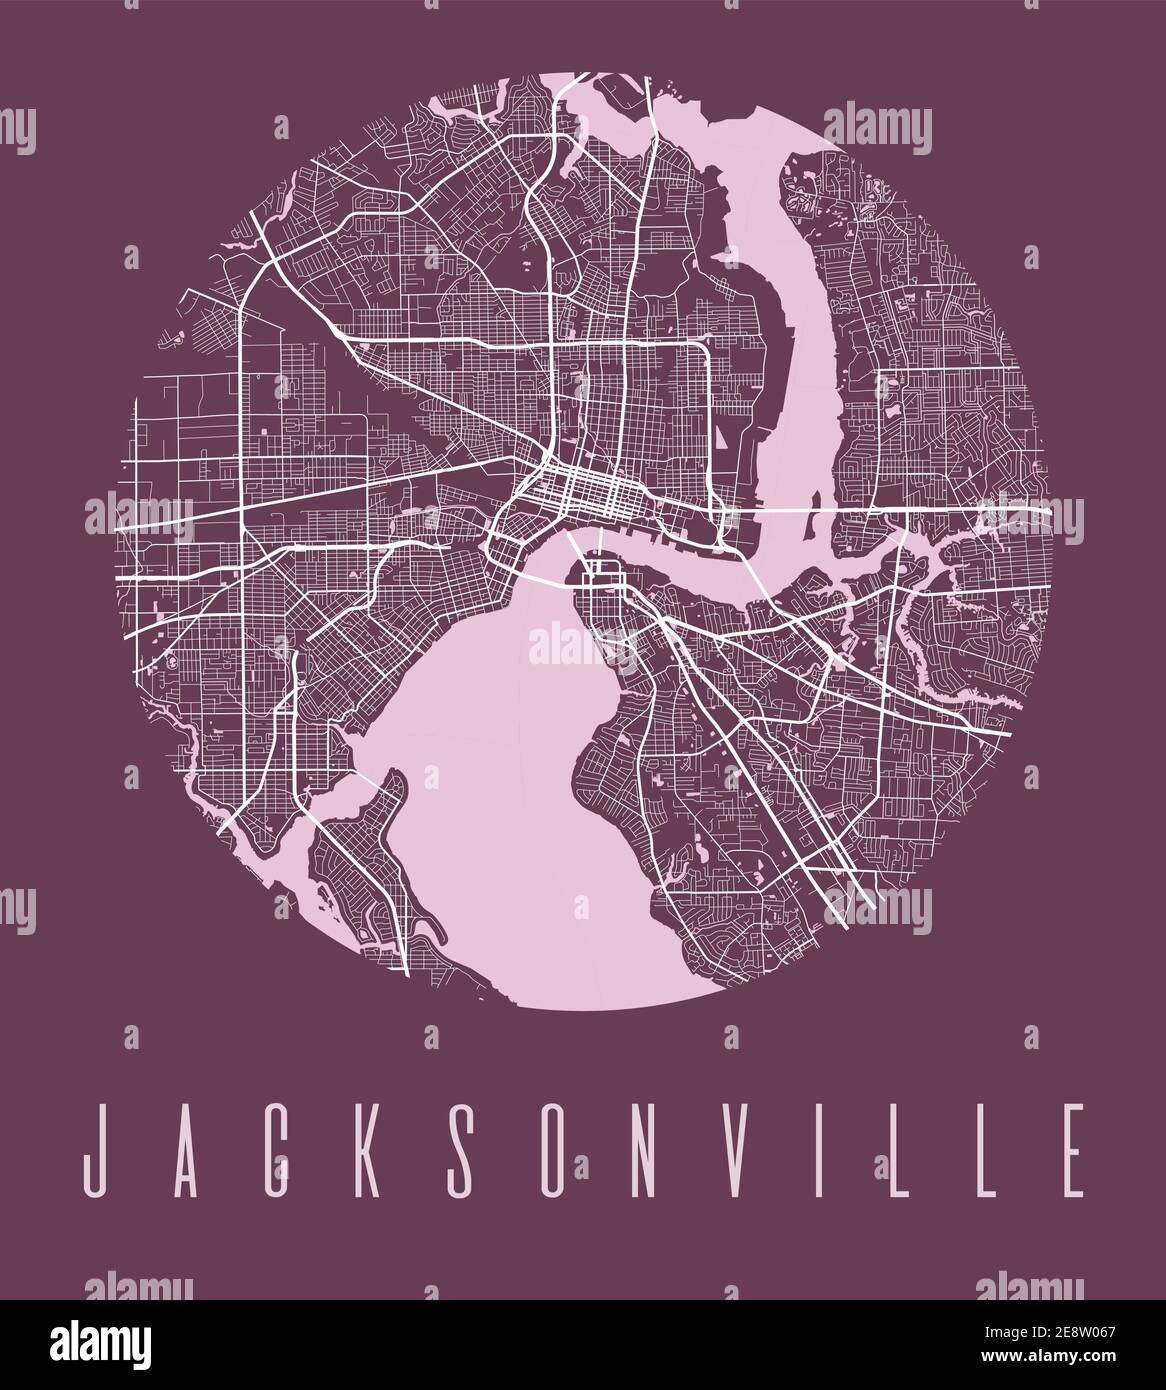 Jacksonville map poster. Decorative design street map of Jacksonville city. Cityscape aria panorama silhouette aerial view, typography style. Land, ri Stock Vector